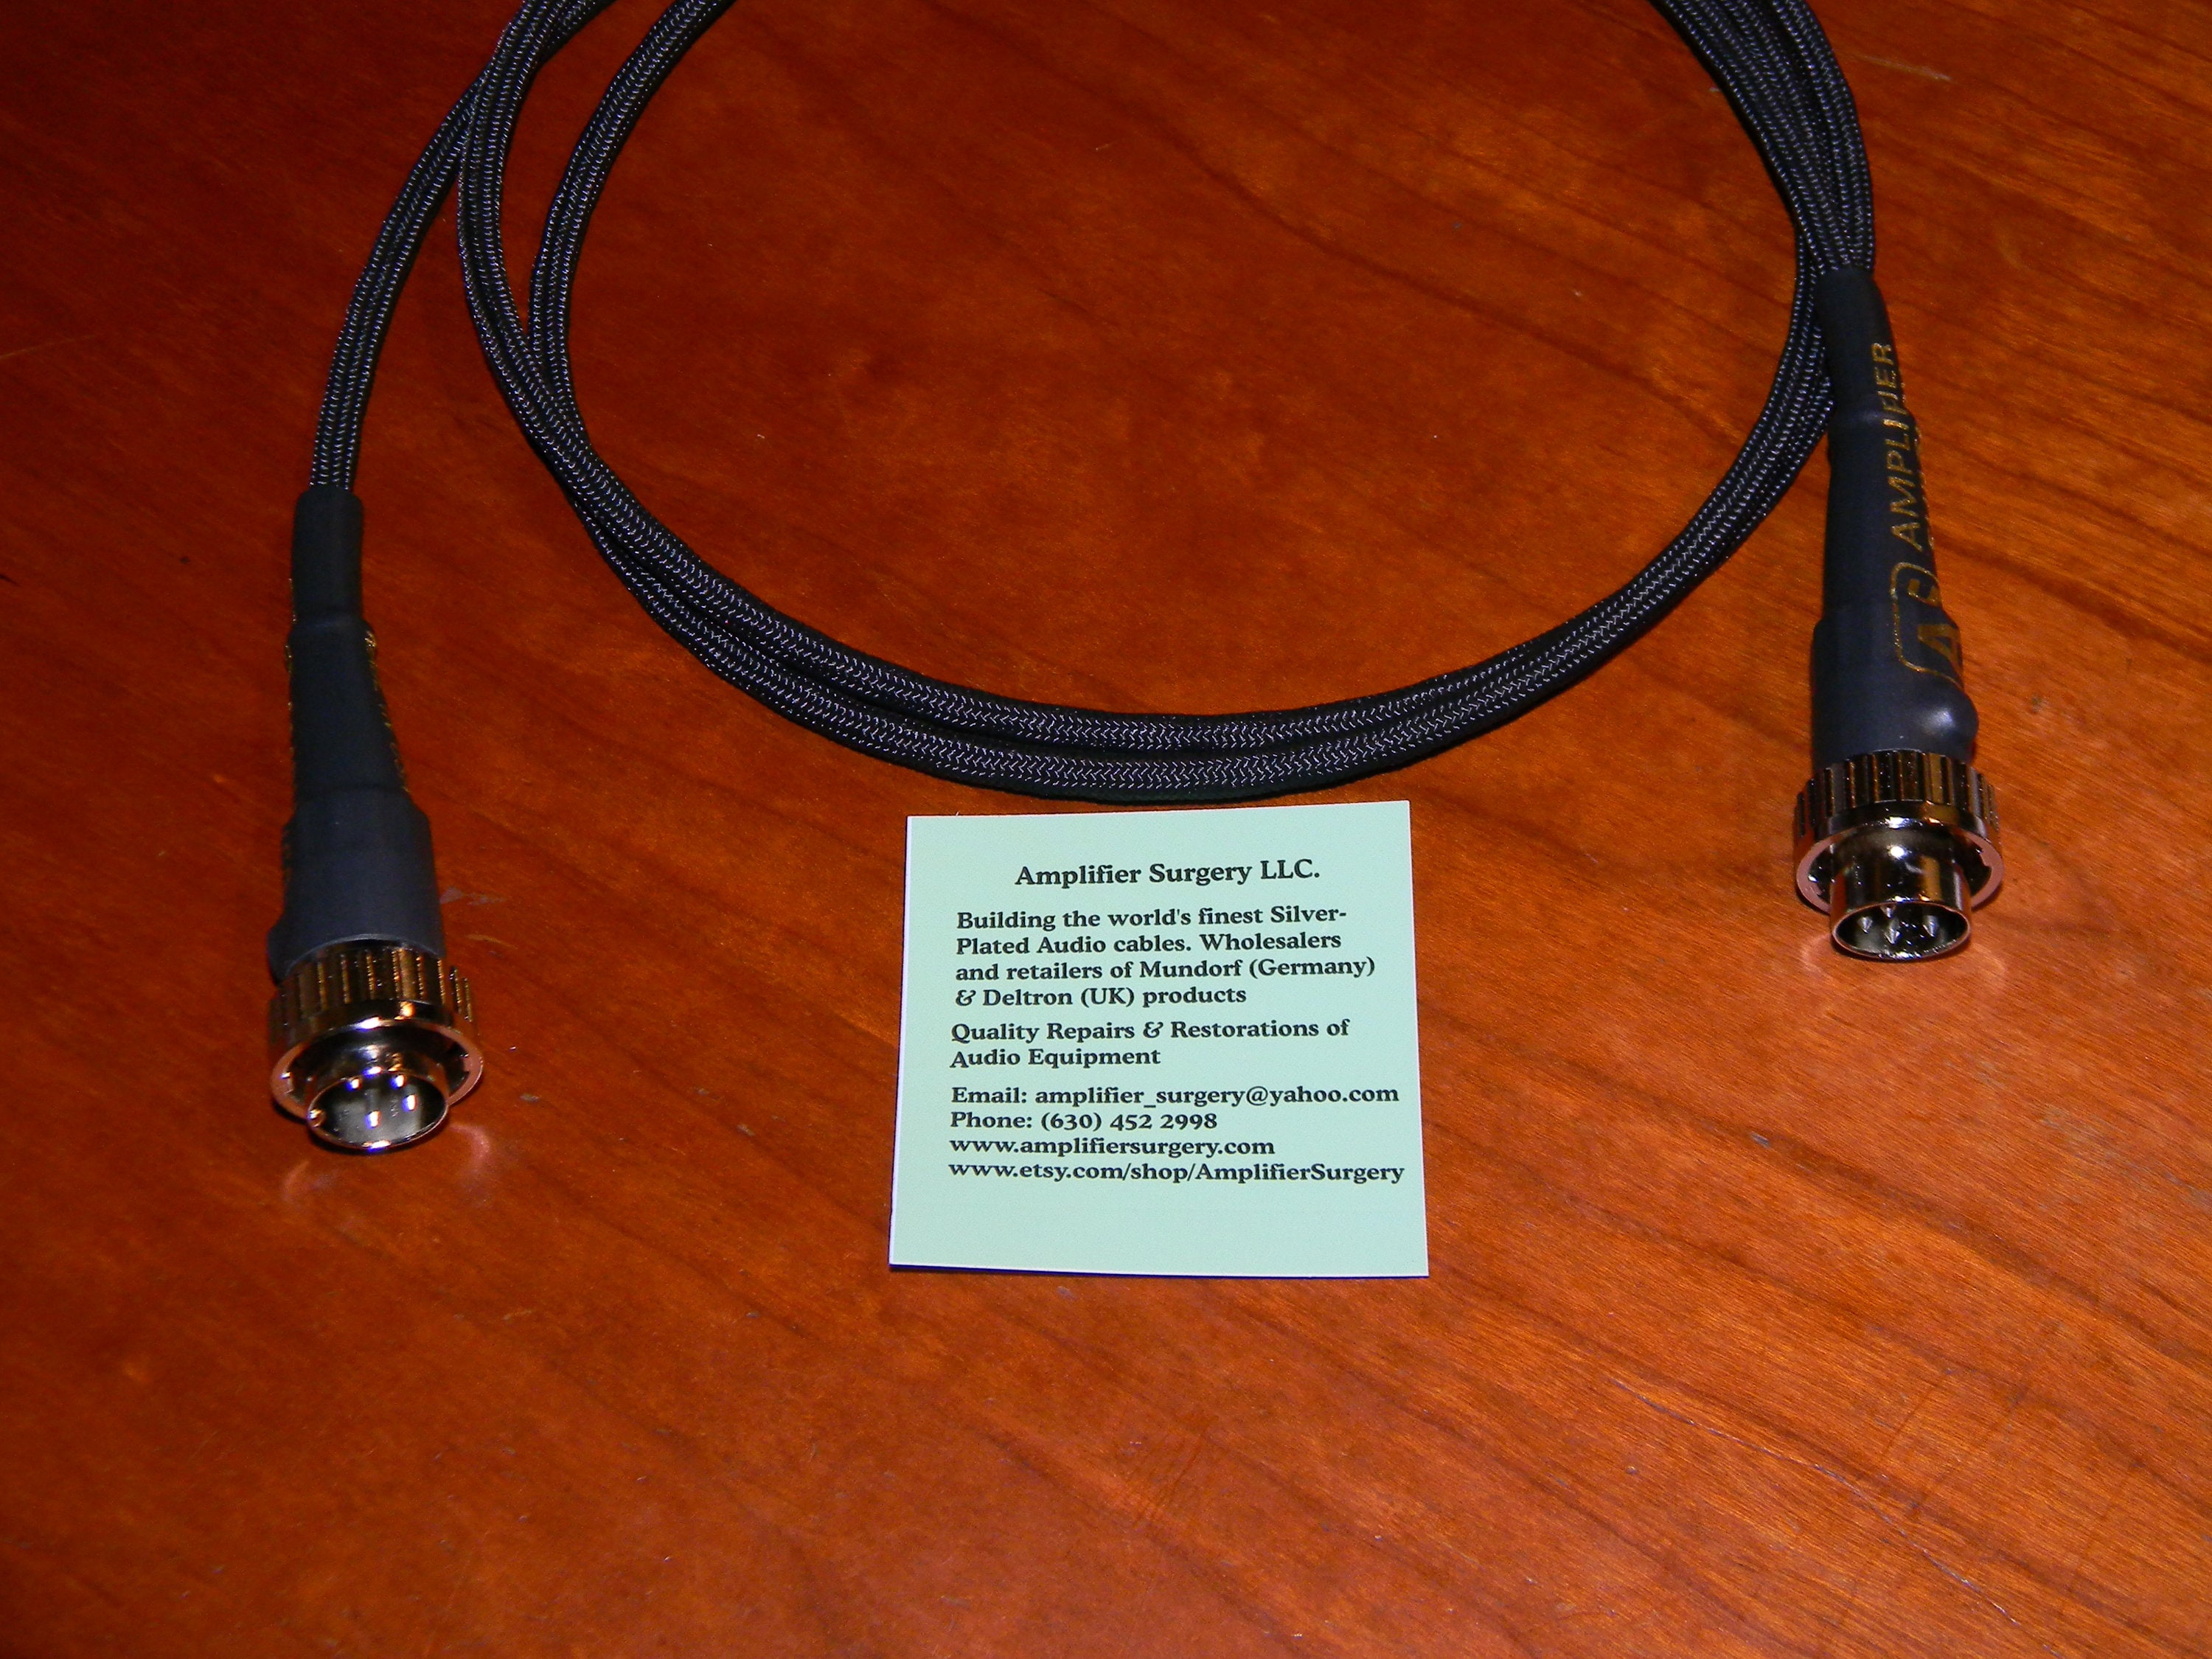 NAIM SNAIC 4 Pin Locking DIN Cable Built With Silver Plated Signal and Power  Wires for Hicap Nac Components 